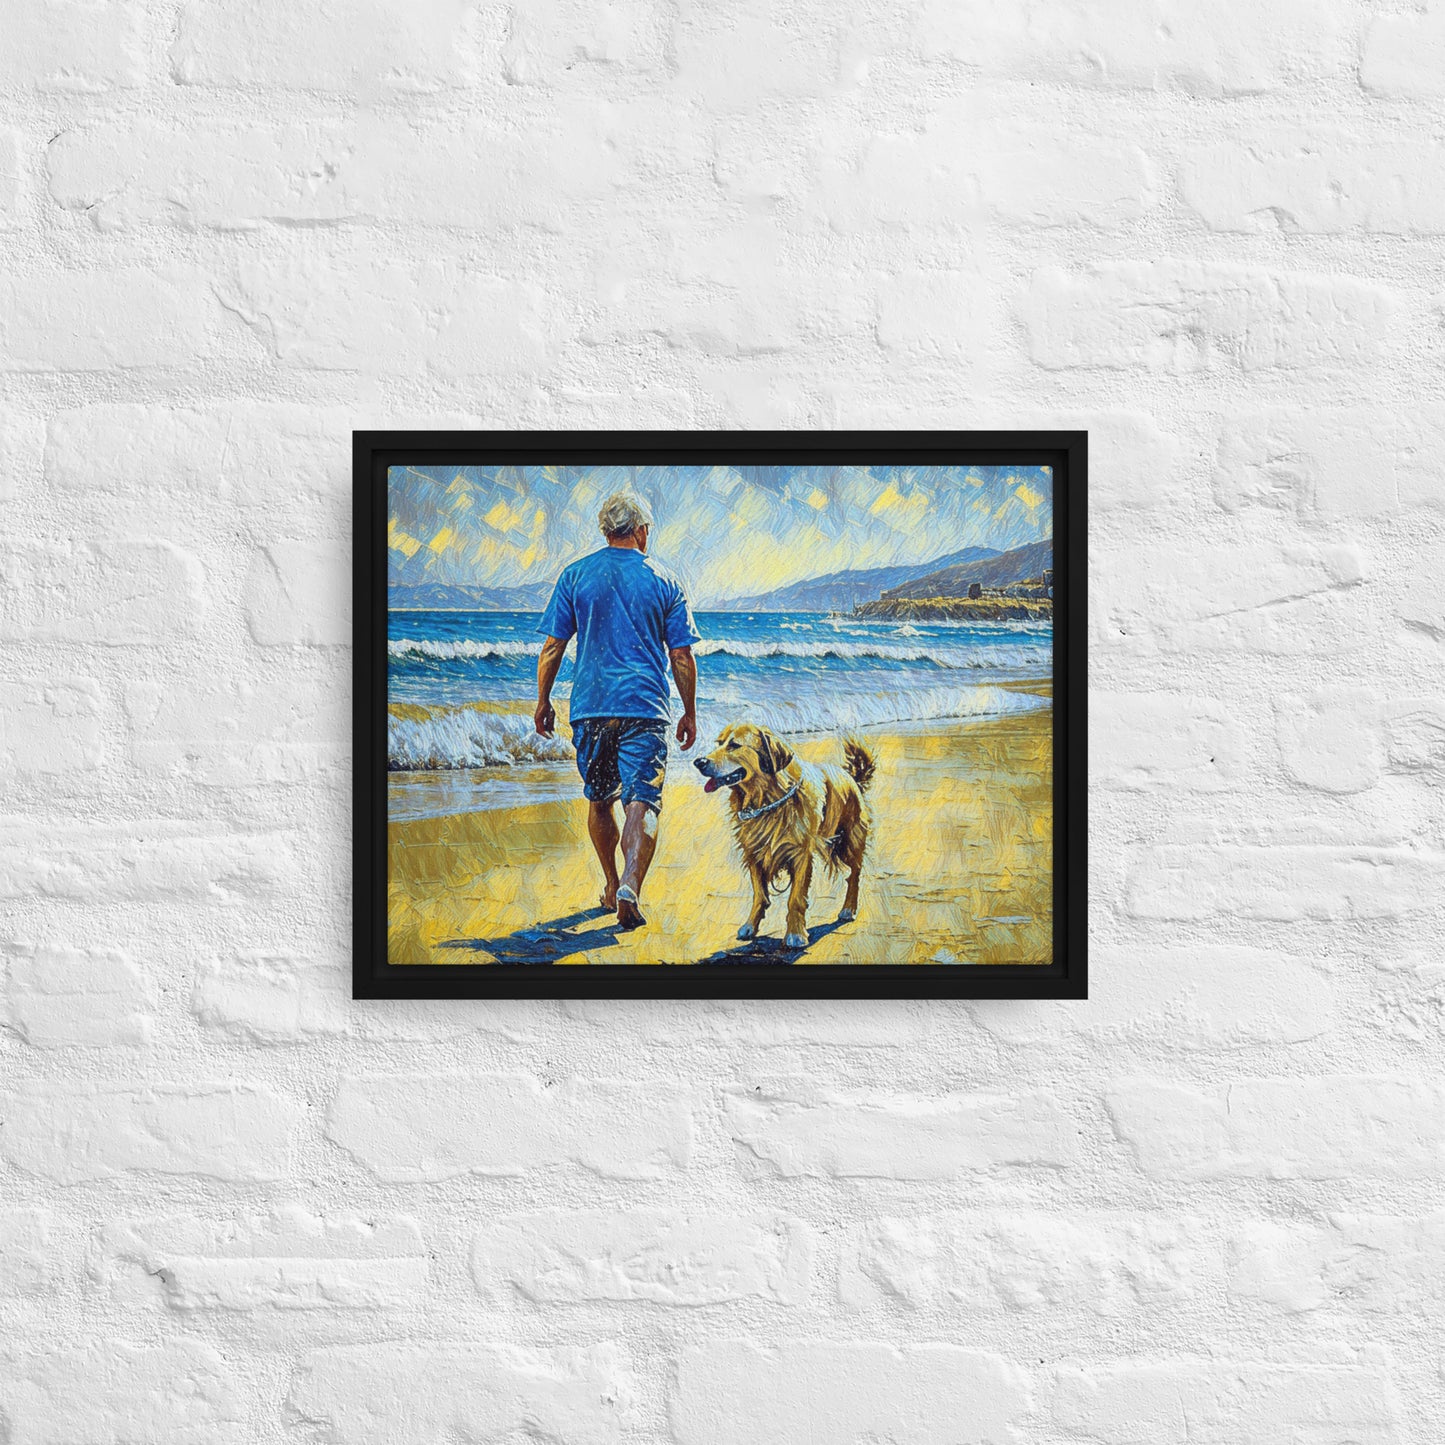 Weekend at the Beach - Digital Art - Framed canvas - FREE SHIPPING